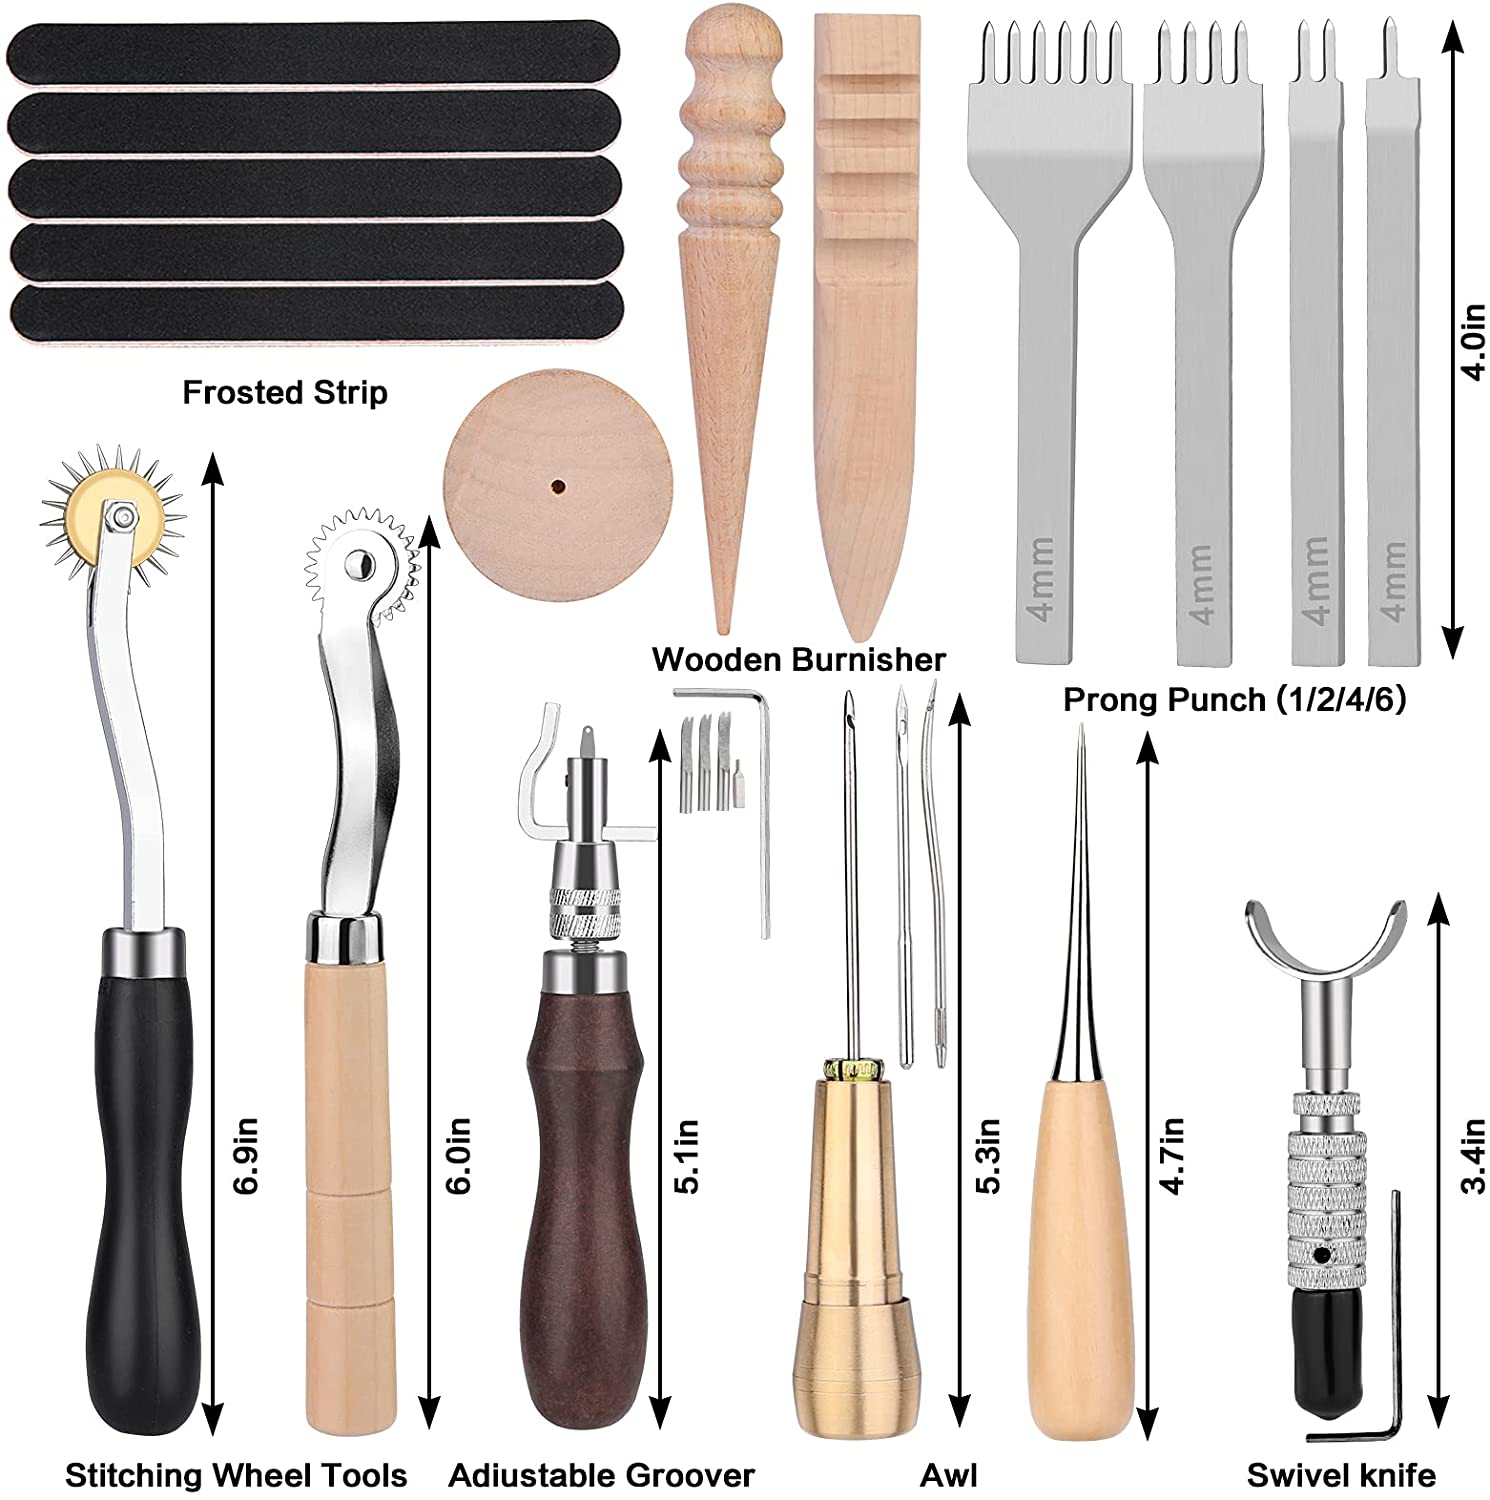 UOOU 46Pcs Leather Craft Tools Kit Leather Working Tools Basic Leather  Sewing Repair kit Waxed Thread Prong Punch Snaps and Rivets Kit Hand Sewing  Needles Awl for Leather Shoes Bag Belt Repairing